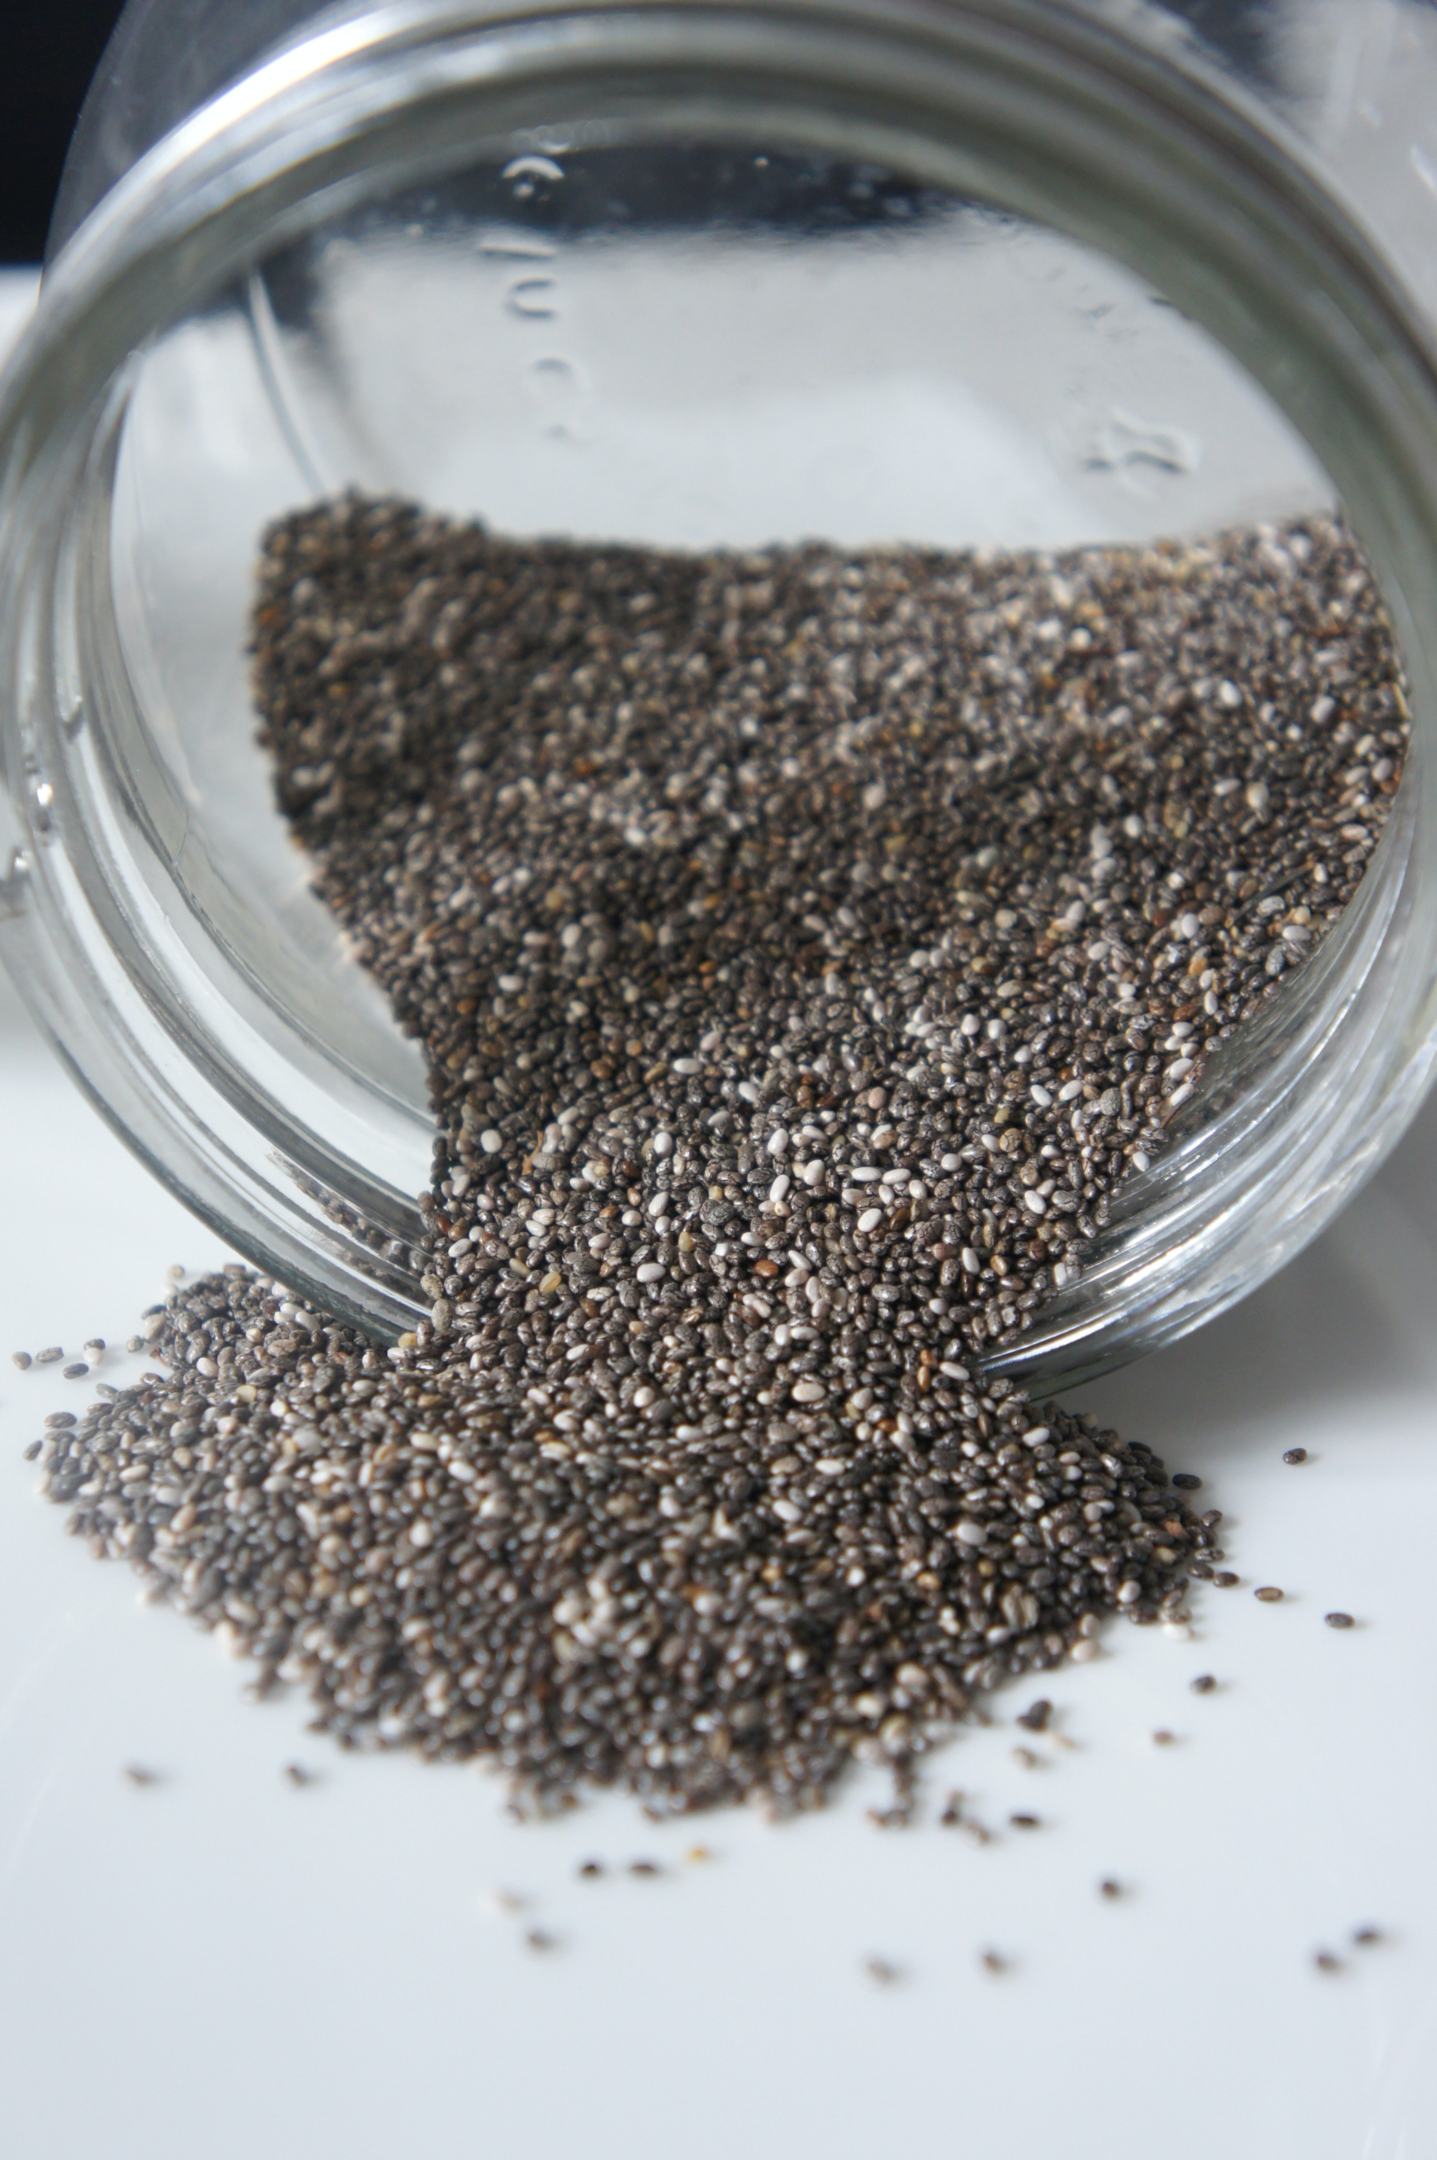 Chia seeds spilling out of a glass pot, highlighting a powerful constipation relief food and natural fiber source for digestive health